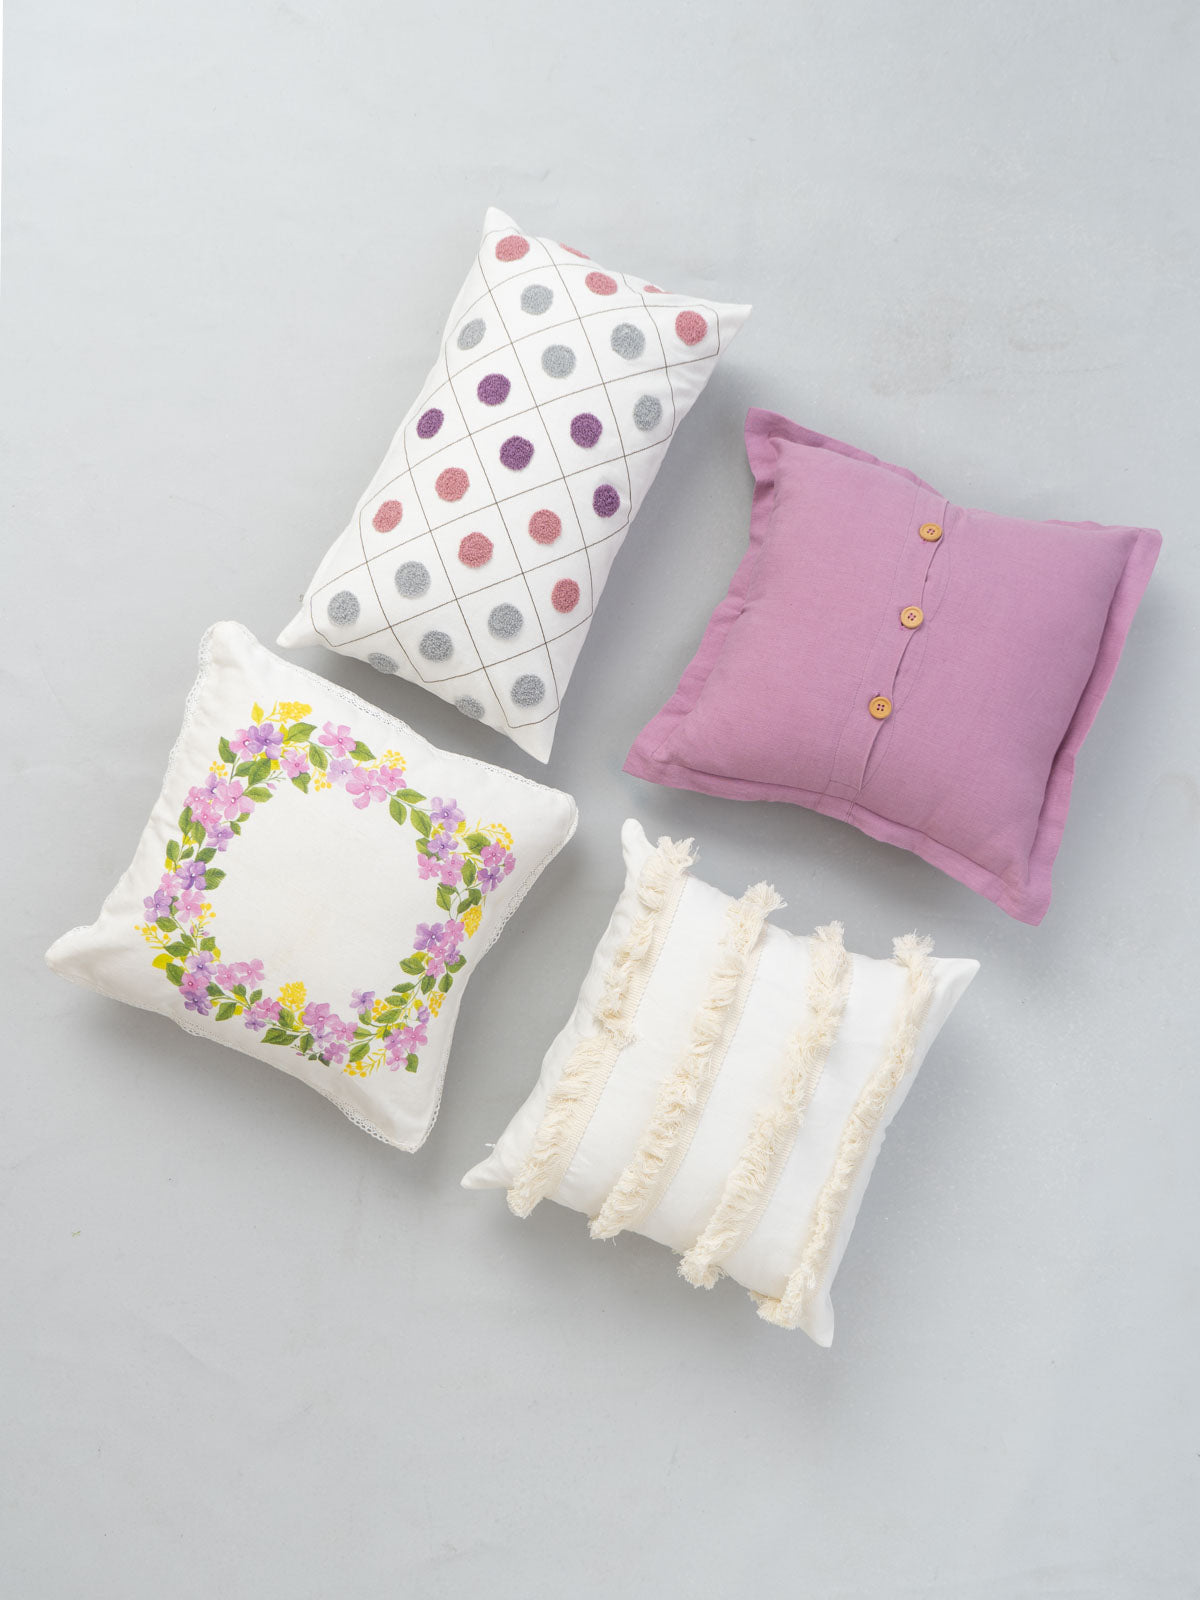 Very Peri Wreath, Dusty Lavender, Dainty Dots Lavender, Fringes Set Of 4 Combo Cotton Cushion Cover - Lavender